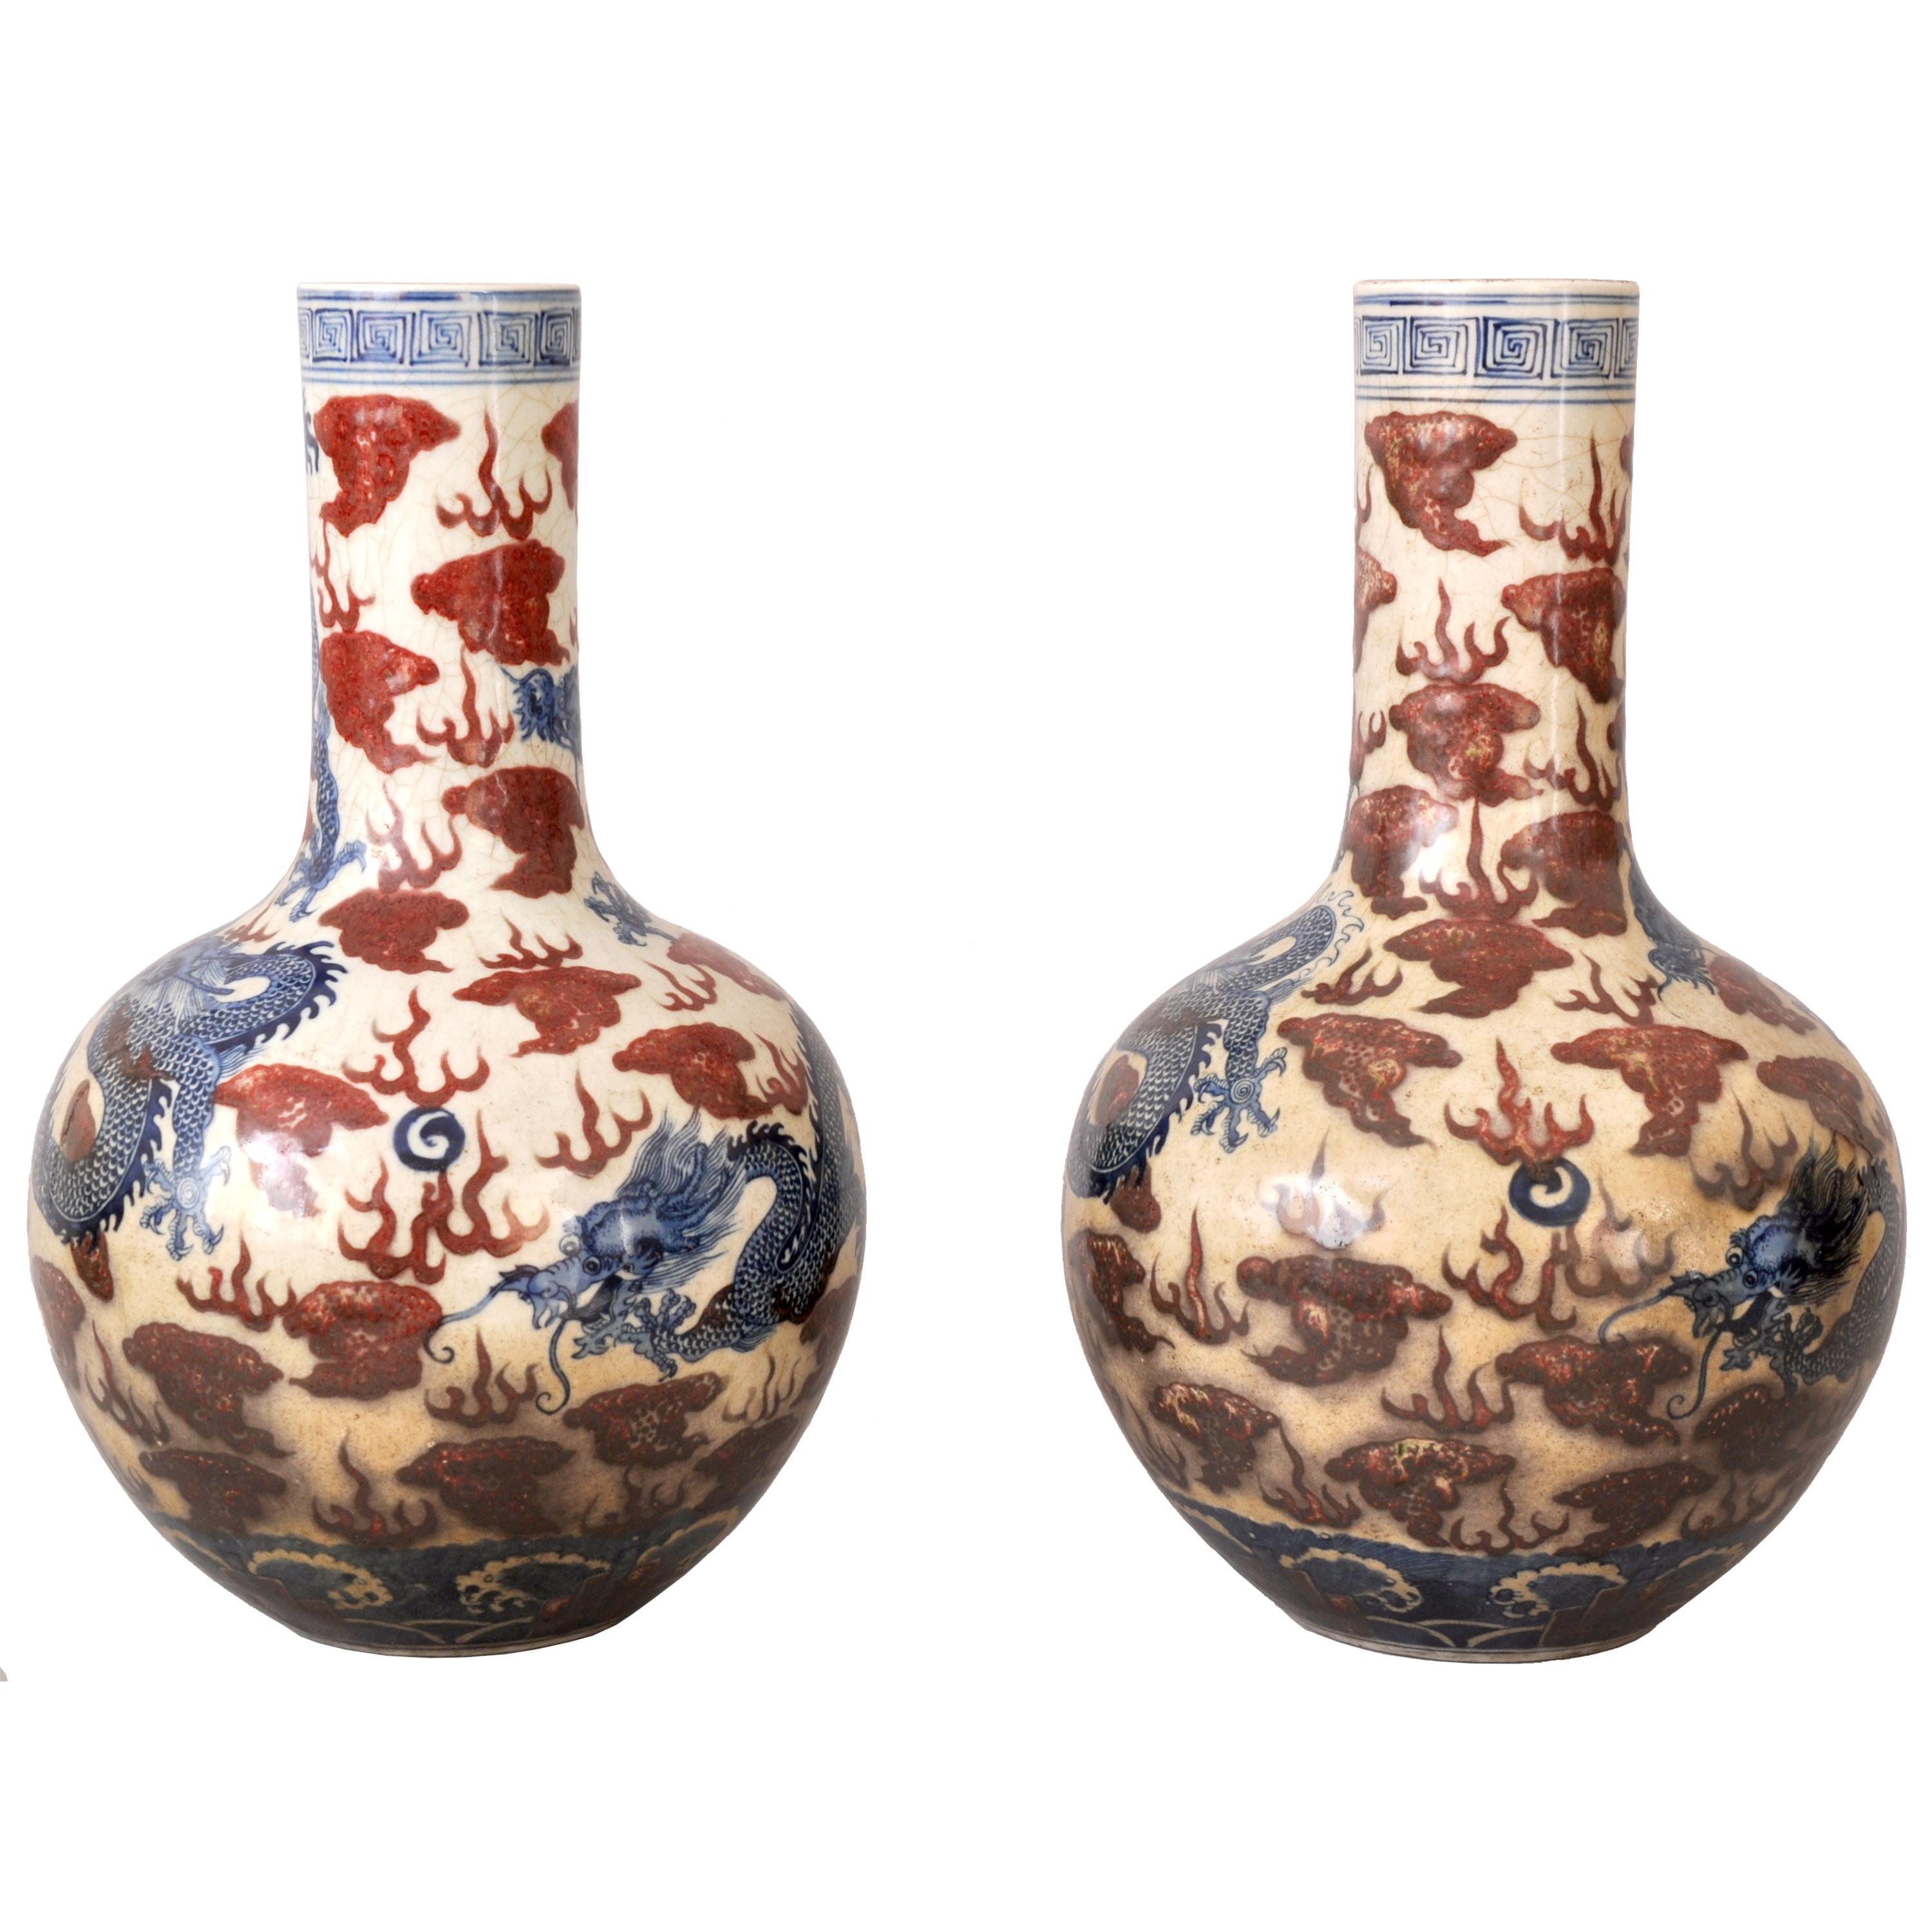 Chinese Export Pair Large Antique Chinese Qing Dynasty Porcelain Blue & White Dragon Vases 1880